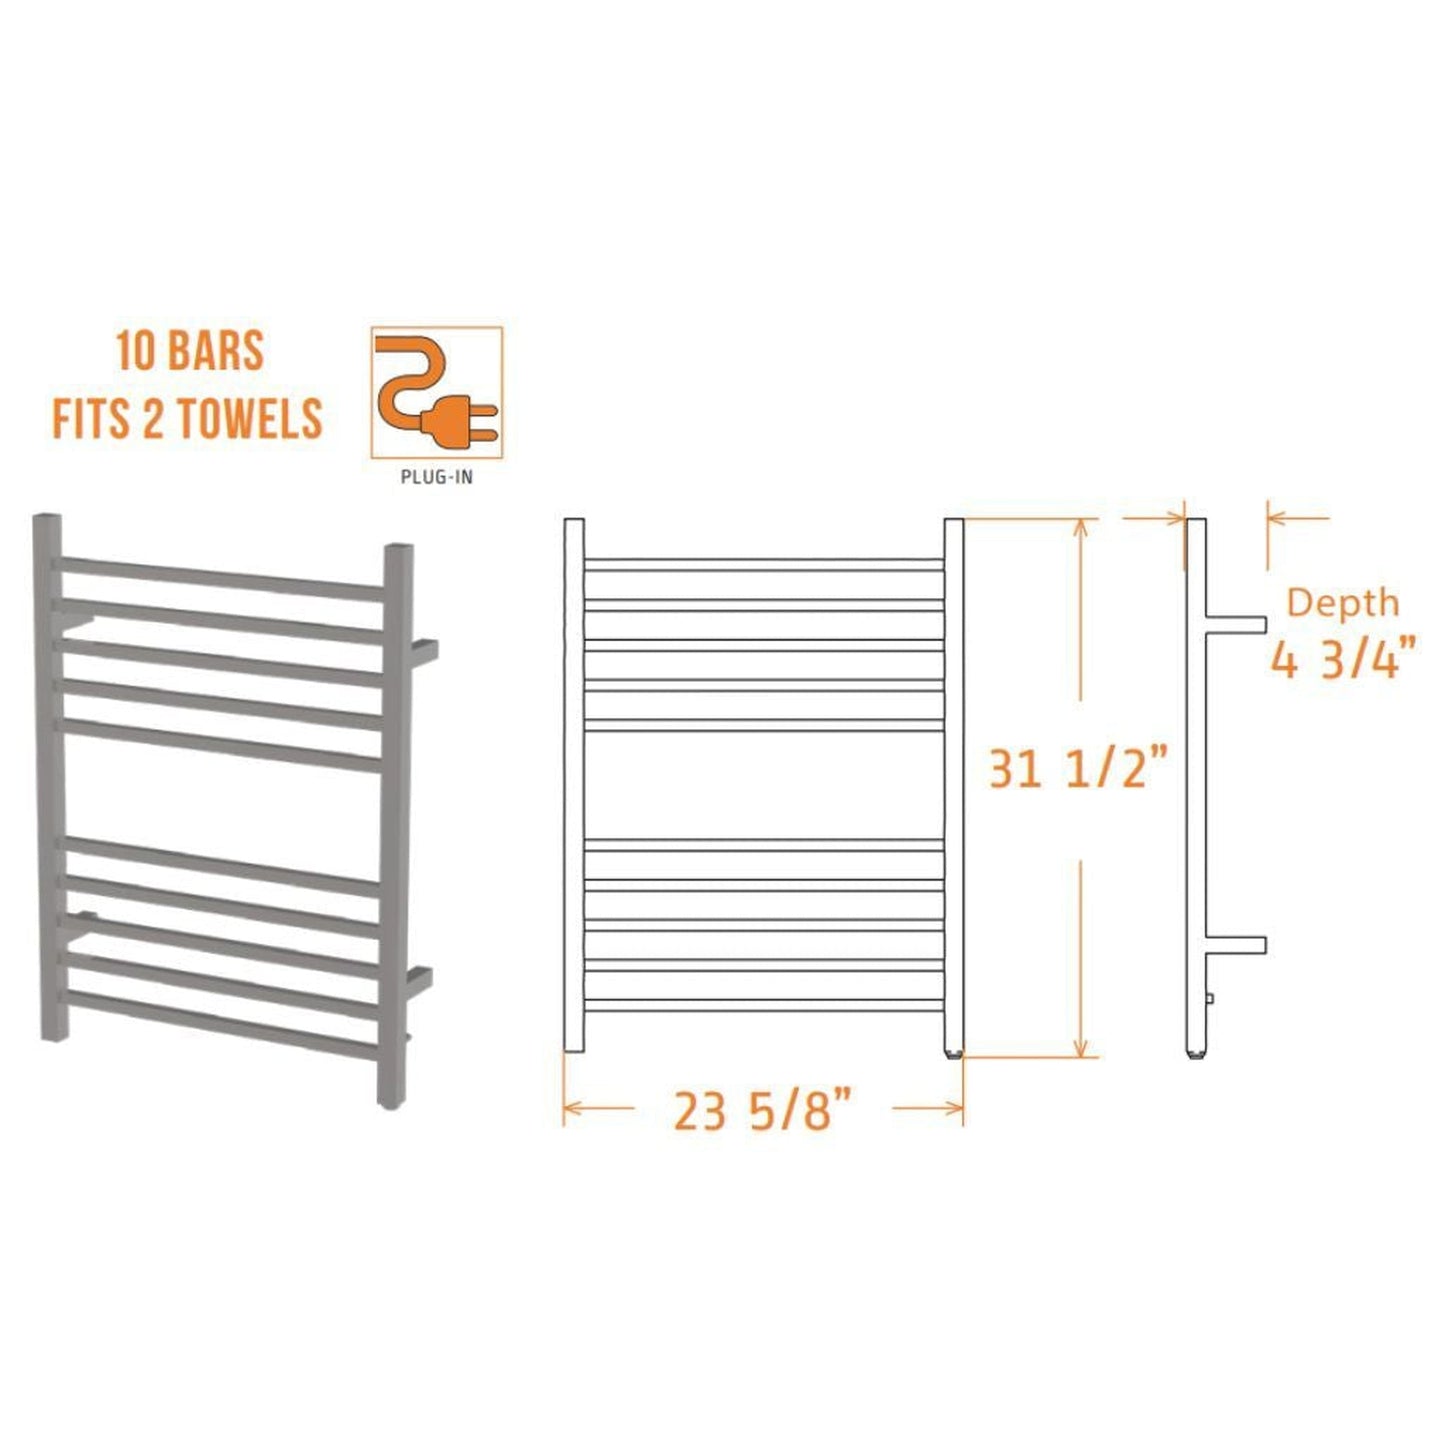 Amba Radiant Square 10-Bar Brushed Stainless Steel Plug-In Towel Warmer